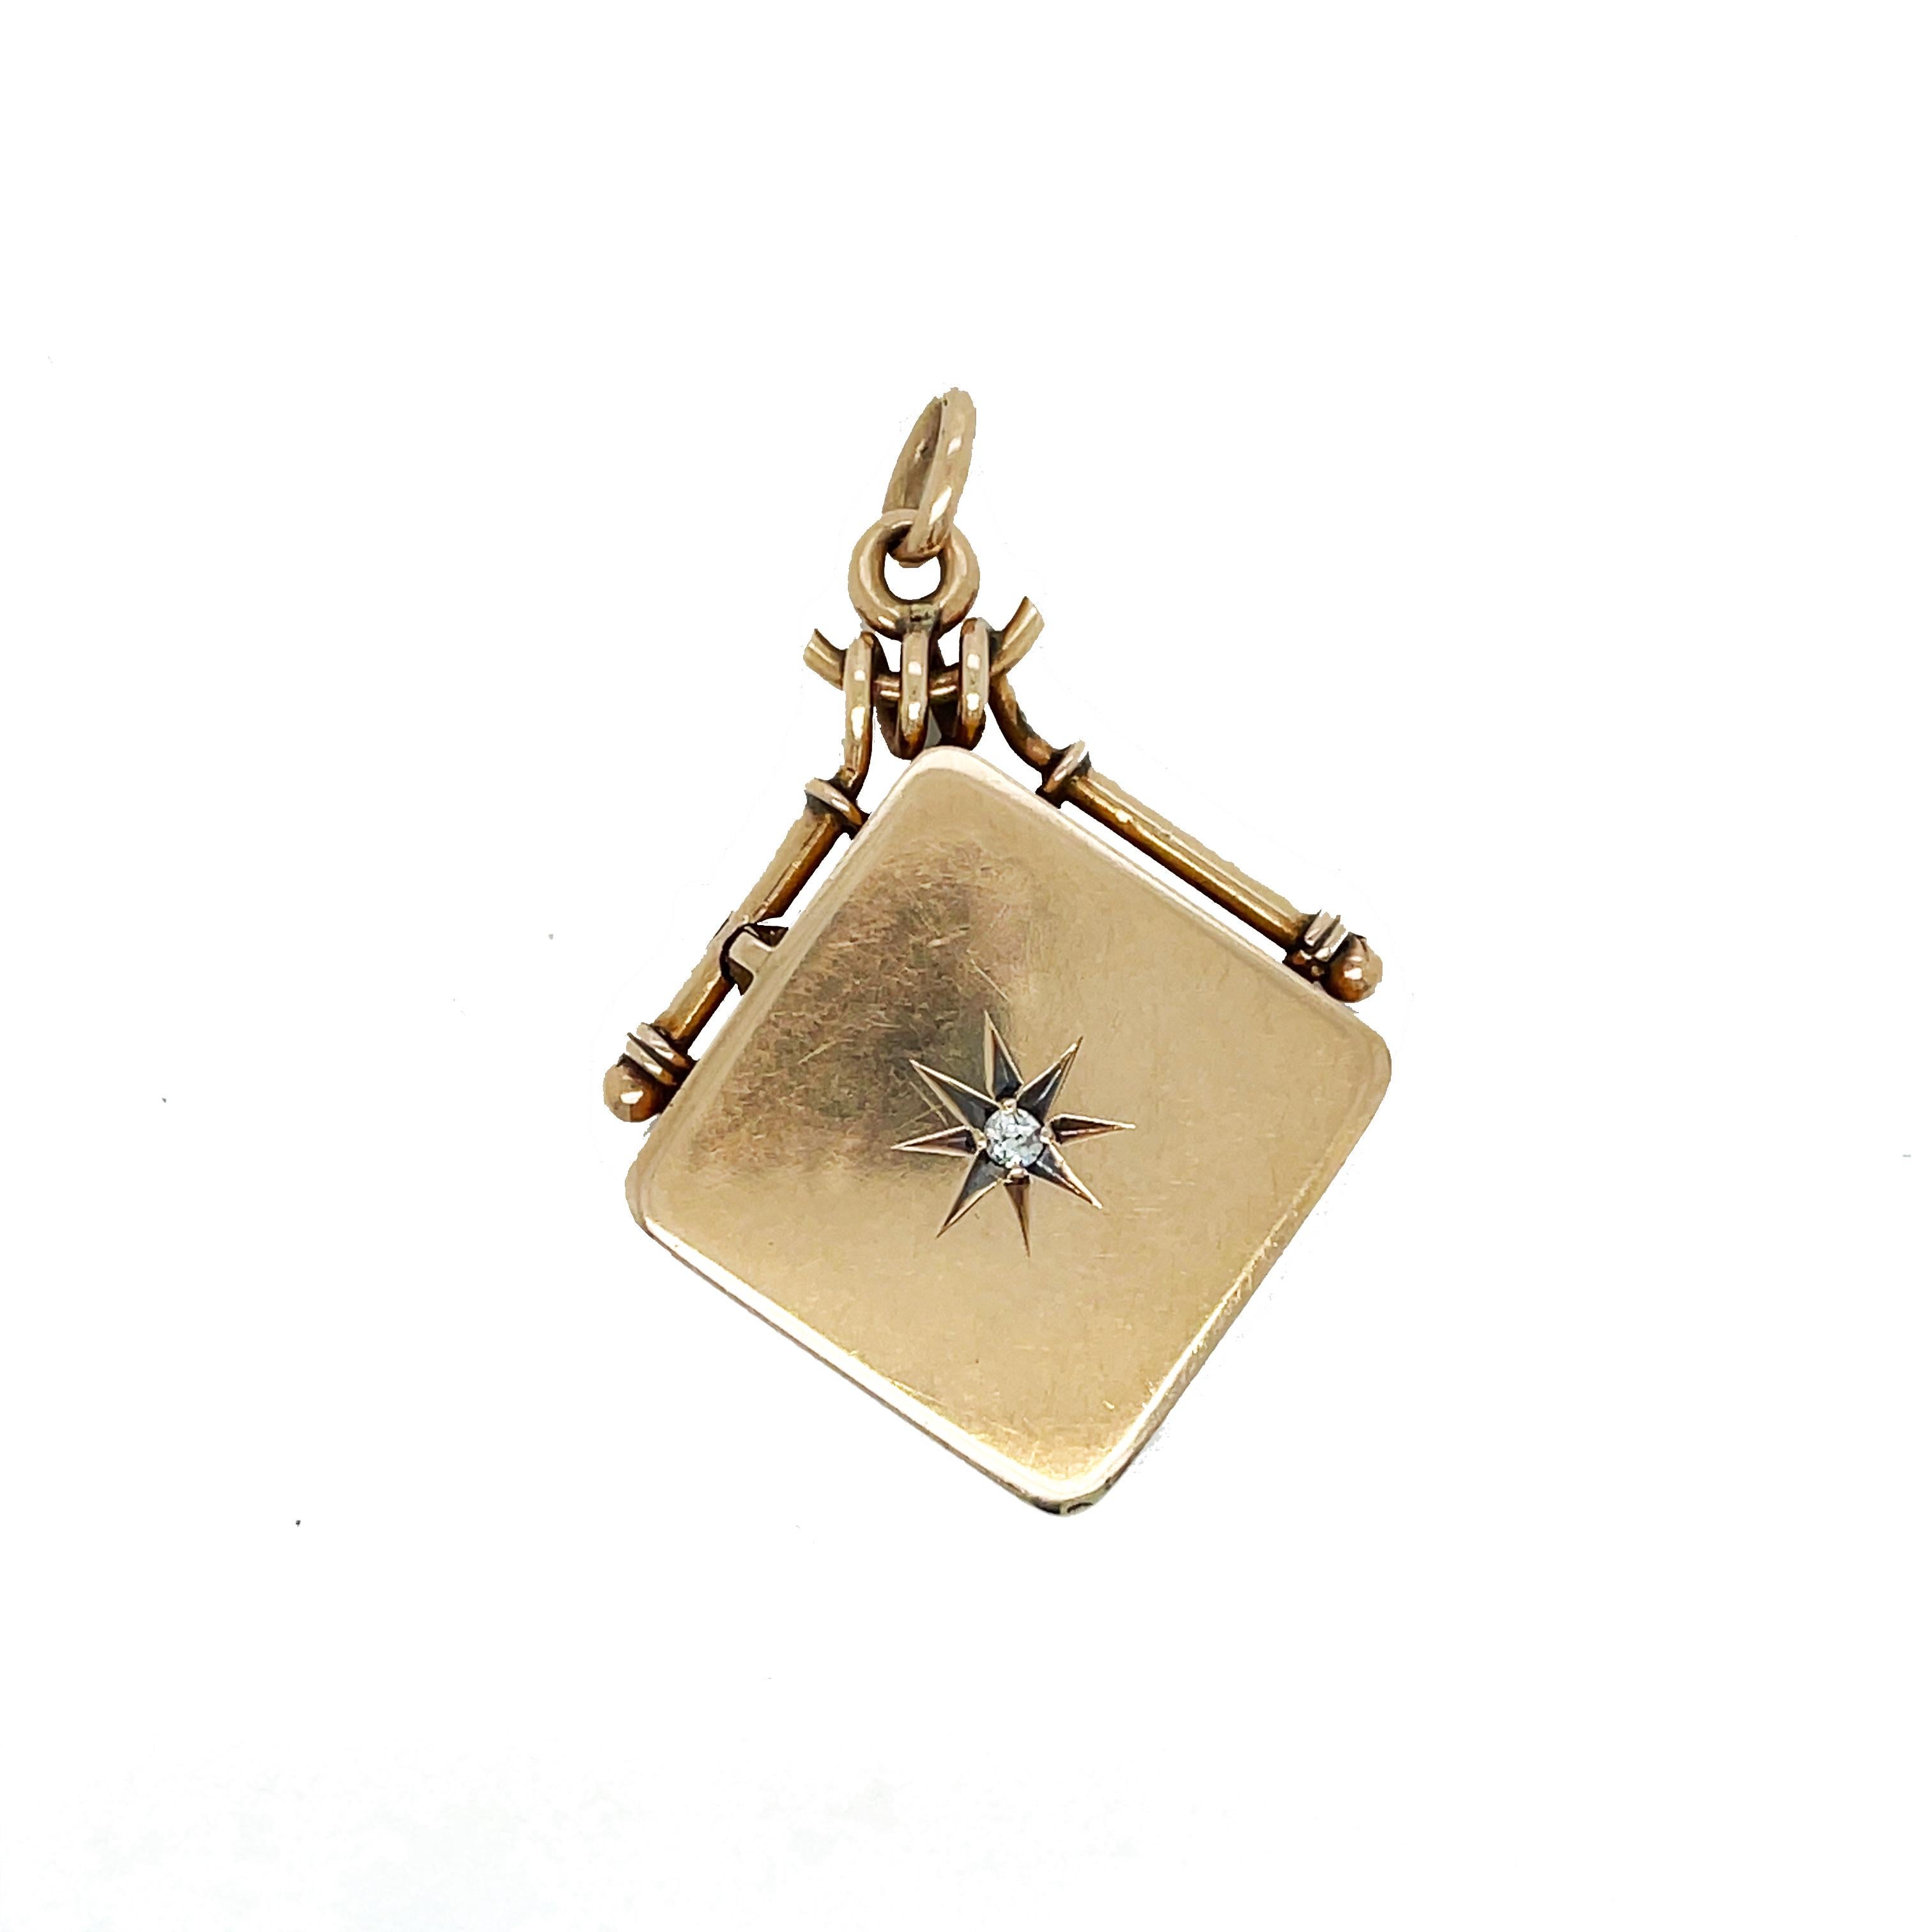 This is a lovely Victorian watch fob locket set in 10K rose gold that features a lovely star set old mine cut diamond! This locket would make a beautiful addition to any jewelry collection and is a gorgeous and timeless piece of jewelry. At the